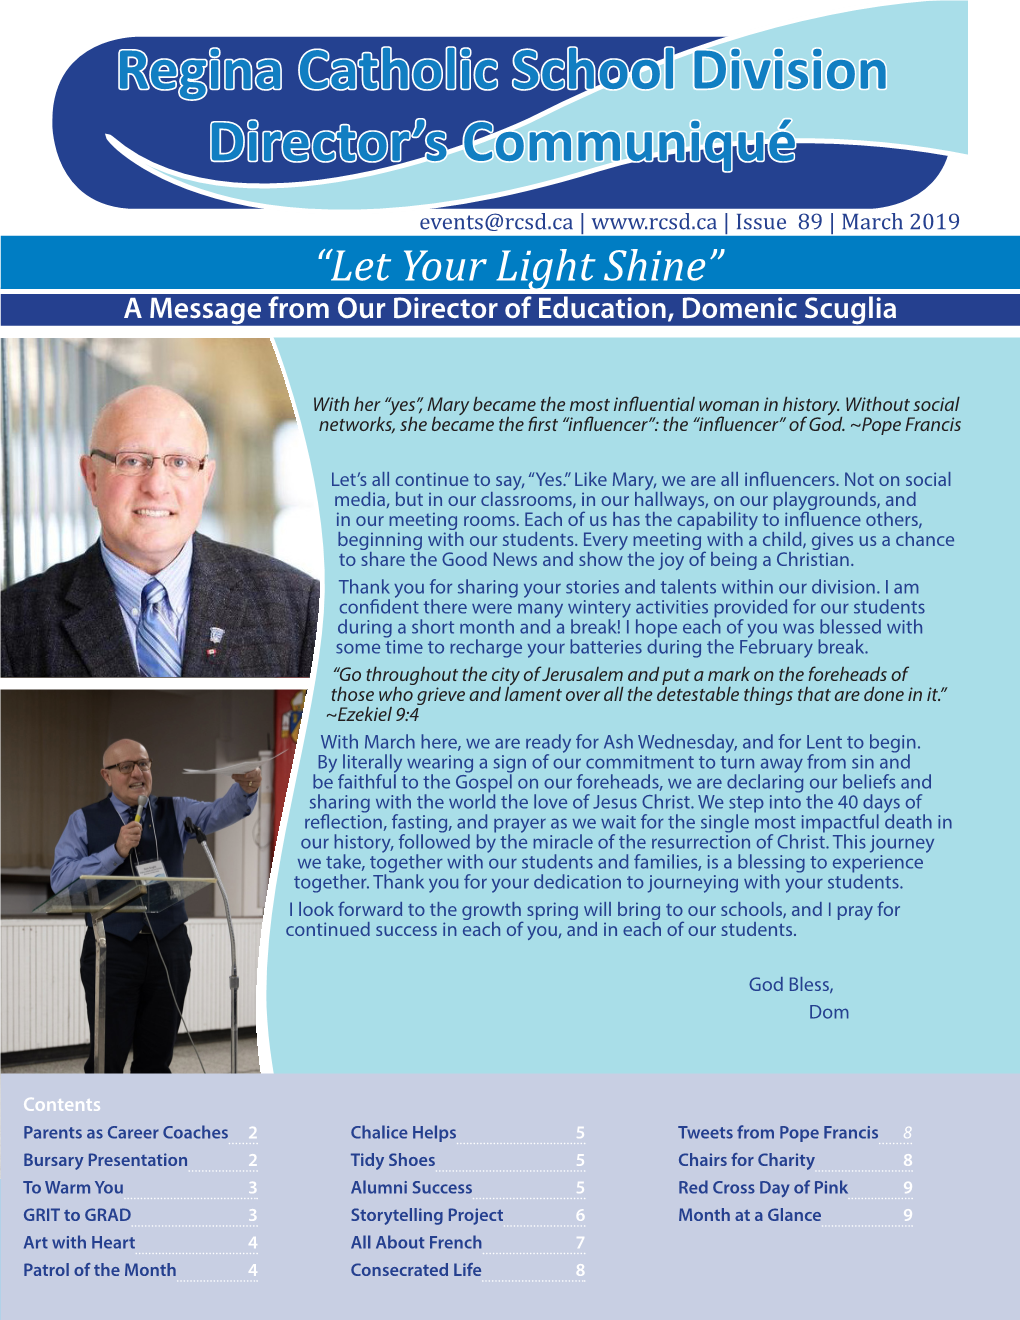 March 2019 “Let Your Light Shine” a Message from Our Director of Education, Domenic Scuglia